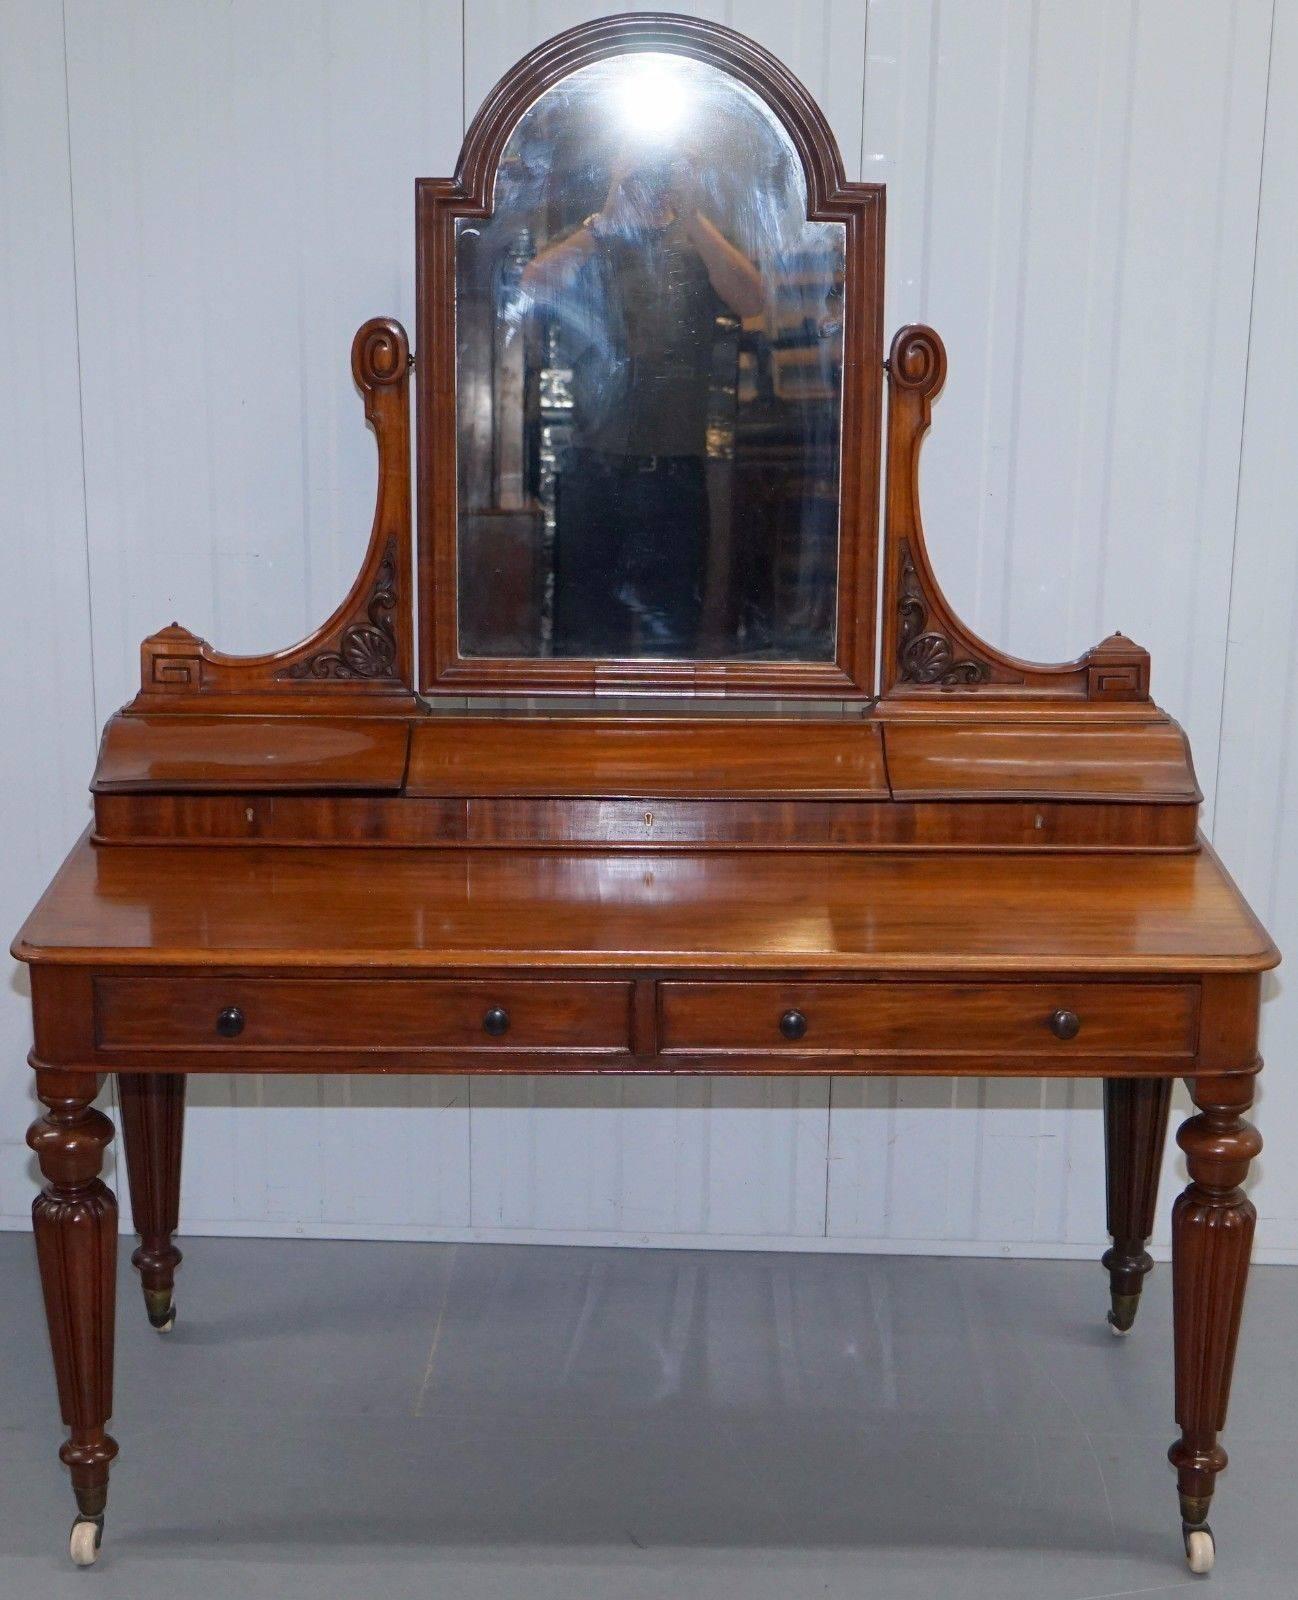 We are delighted to offer for sale this lovely period William IV, circa 1830, mahogany dressing table with Gillow’s reeded legs

A truly stunning piece, this is one of the best looking and made dressing tables I have ever come across, the mahogany